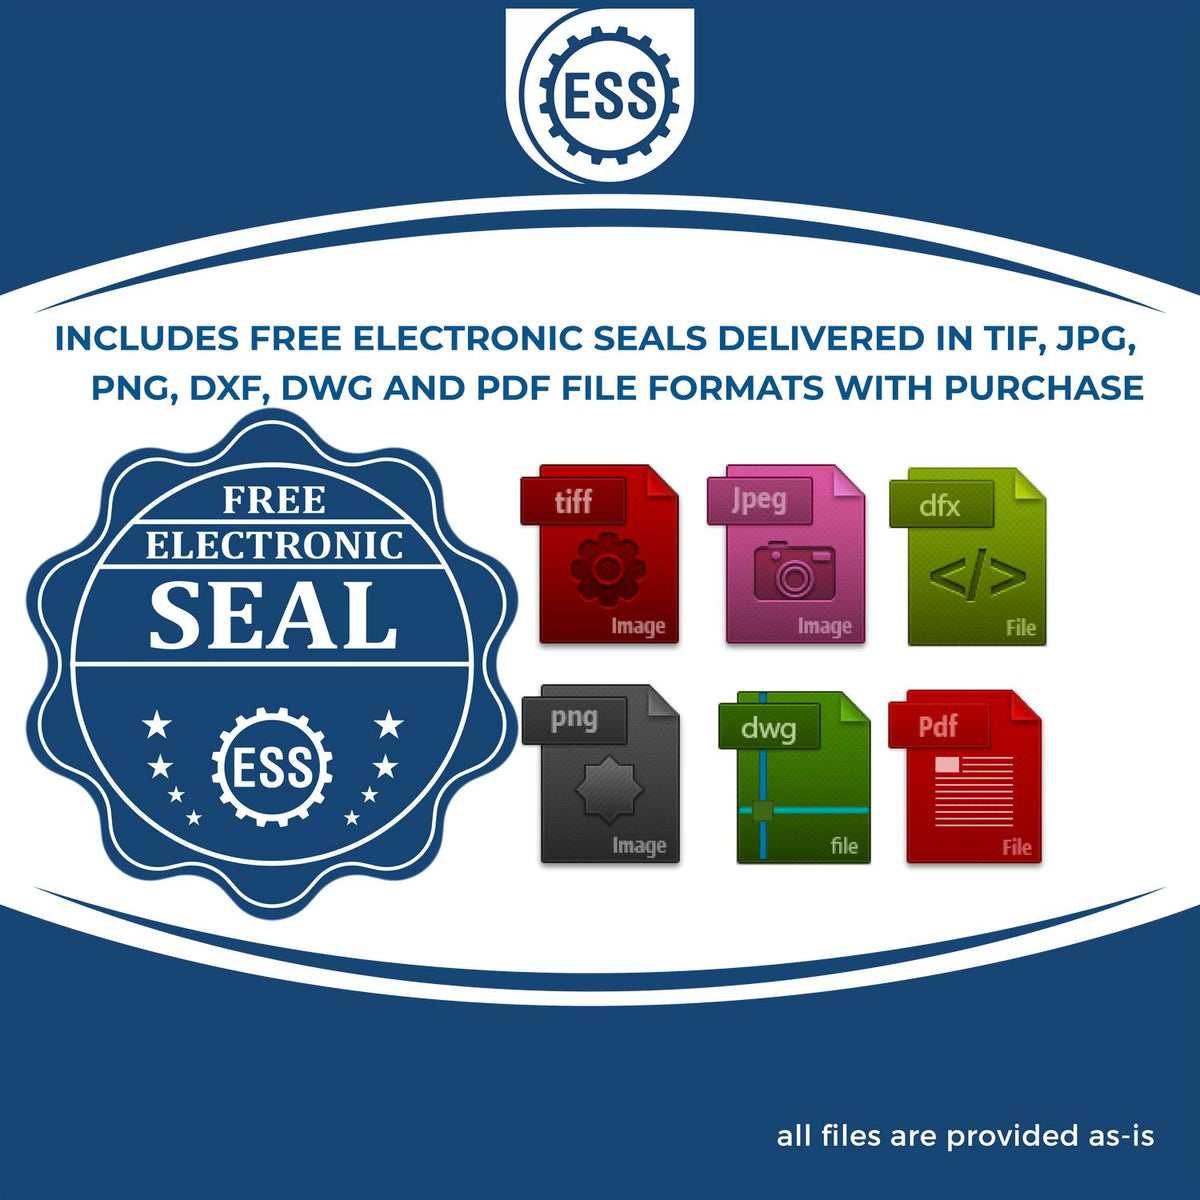 An infographic for the free electronic seal for the Long Reach Utah PE Seal illustrating the different file type icons such as DXF, DWG, TIF, JPG and PNG.